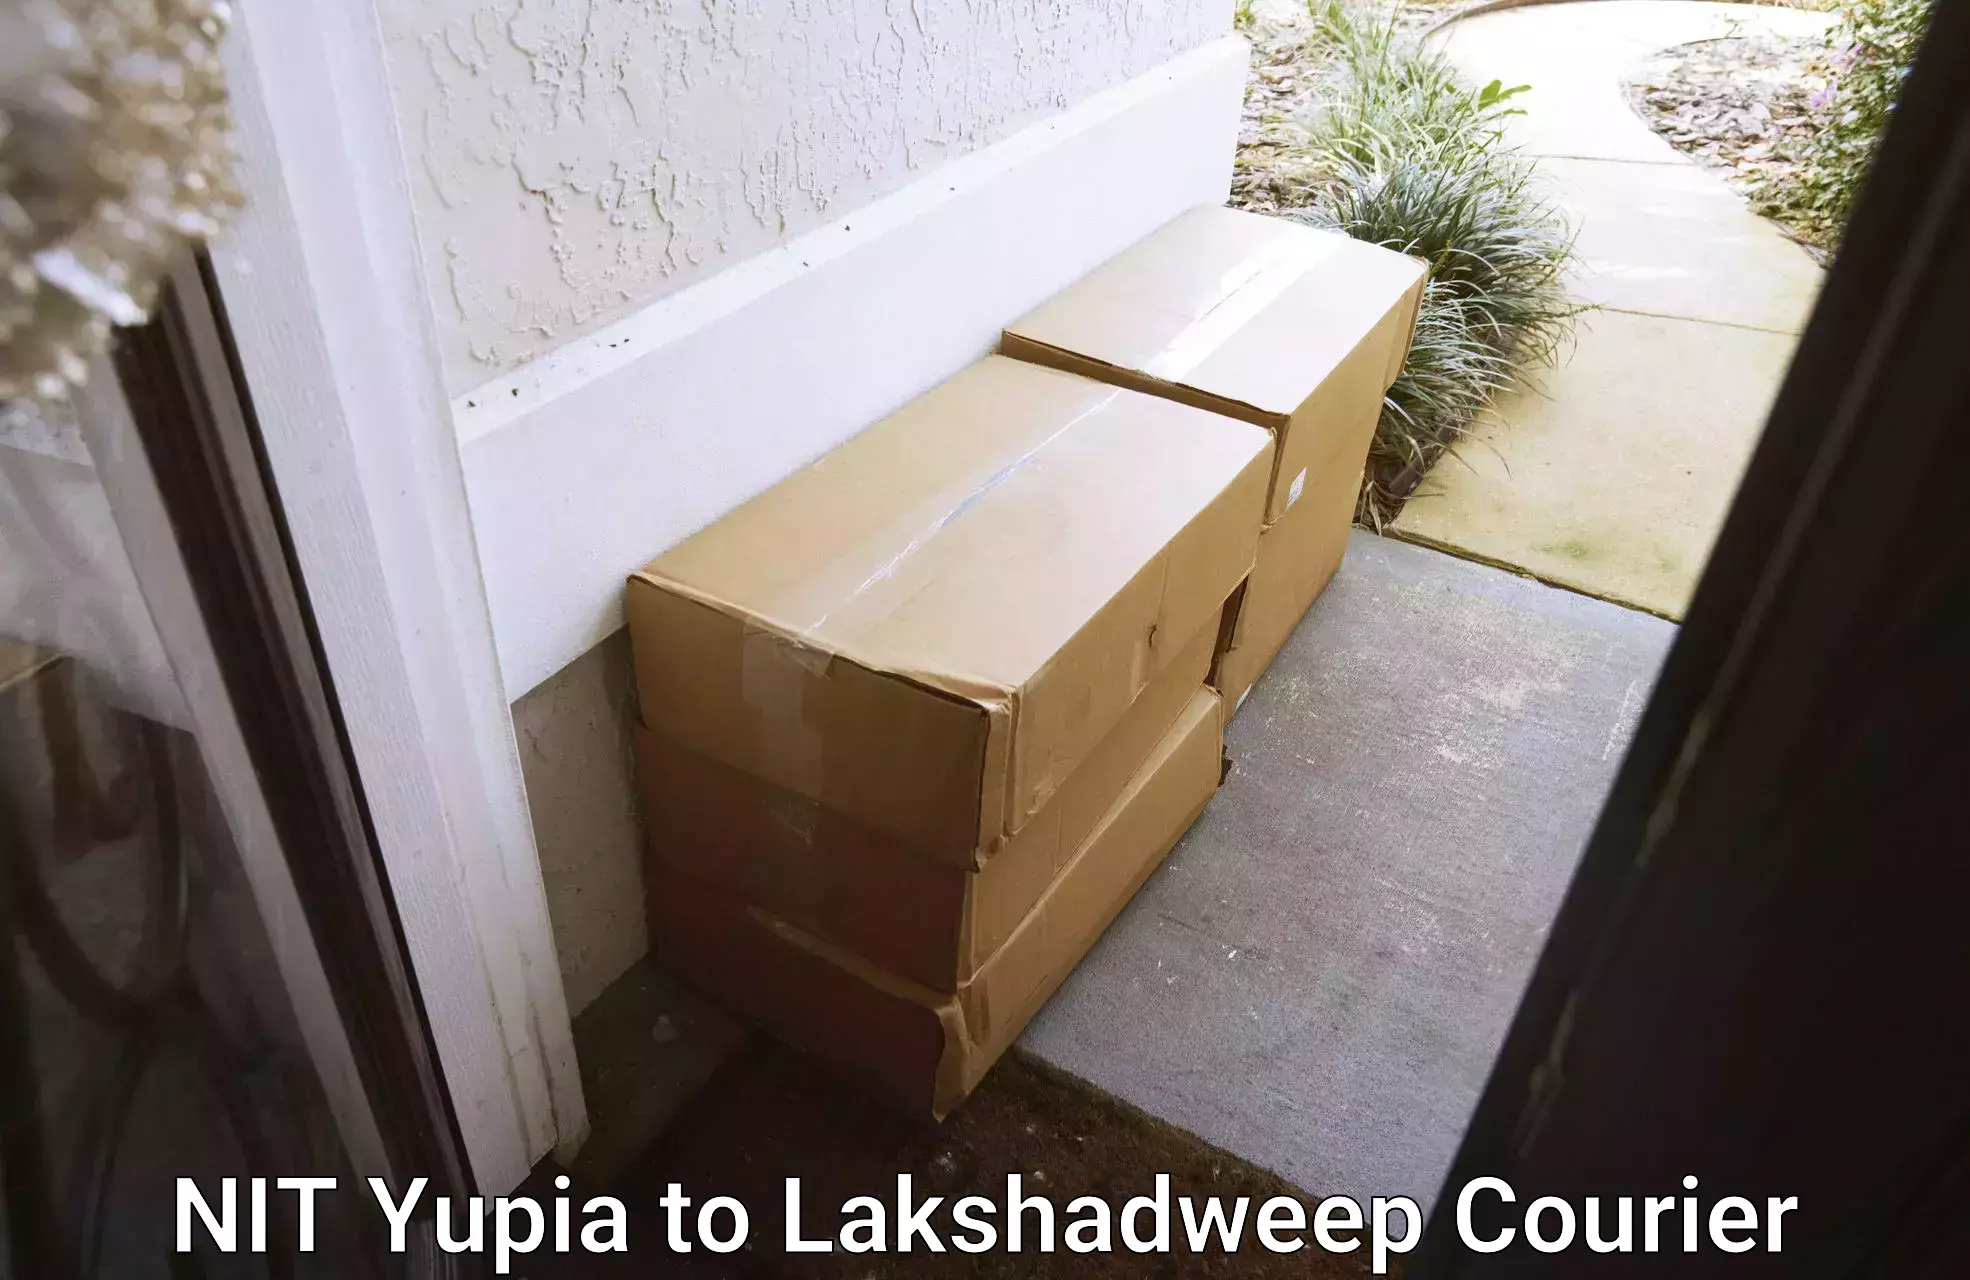 Weekend courier service NIT Yupia to Lakshadweep